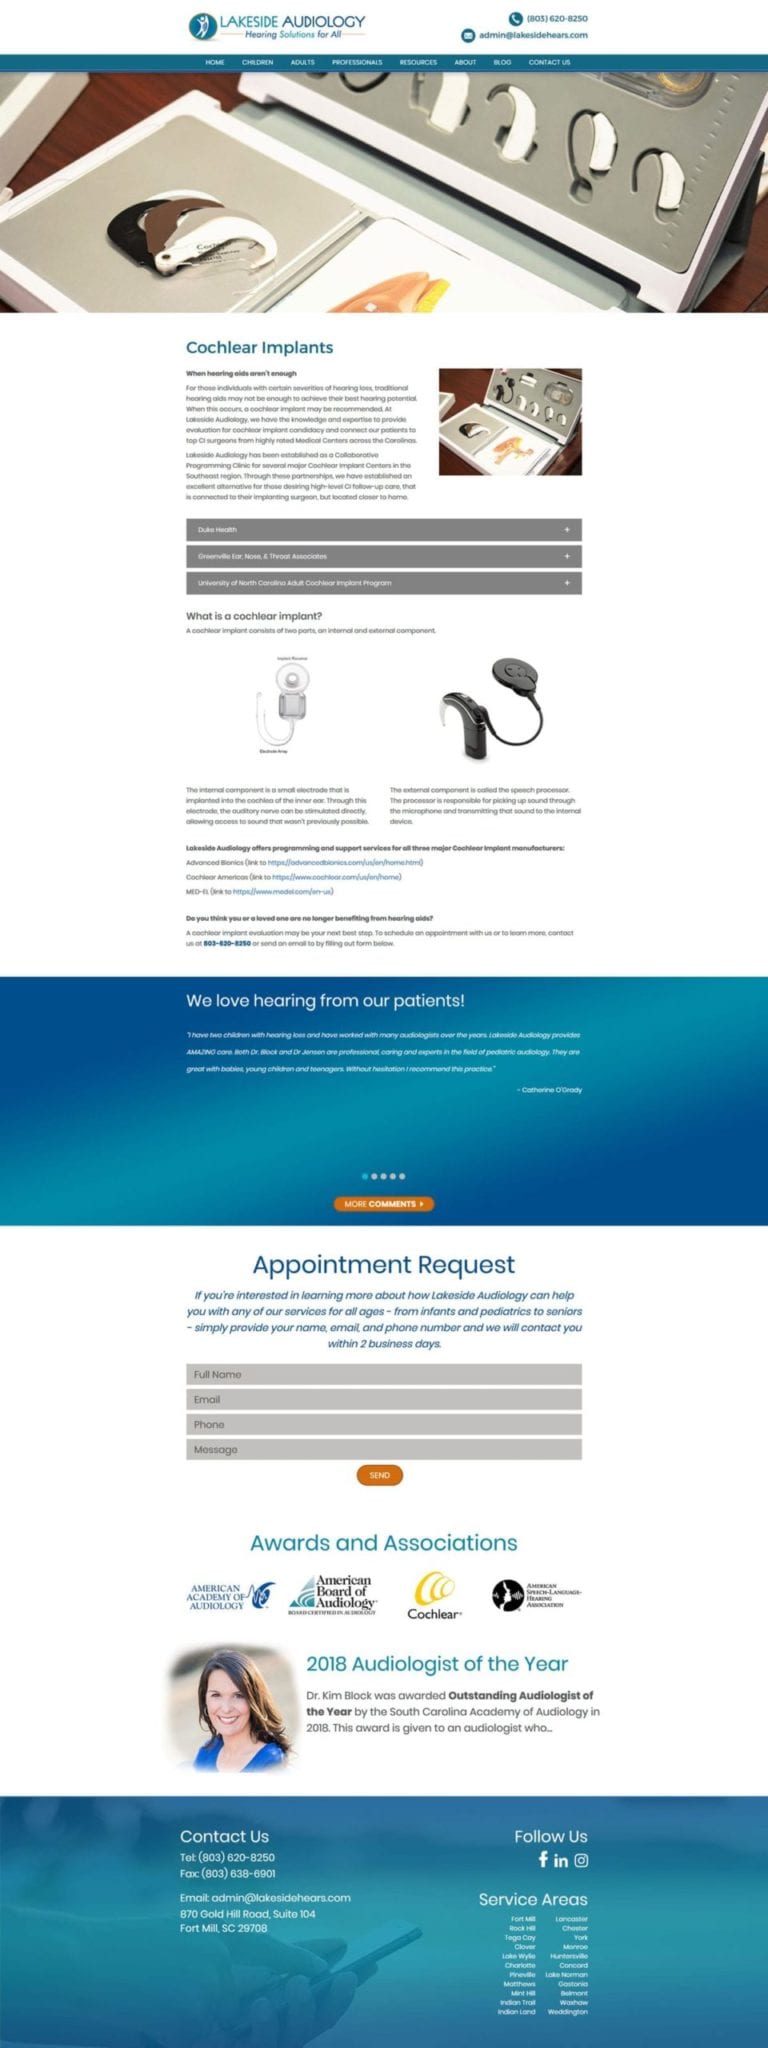 Lakeside Audiology website cochlear implants page screenshot